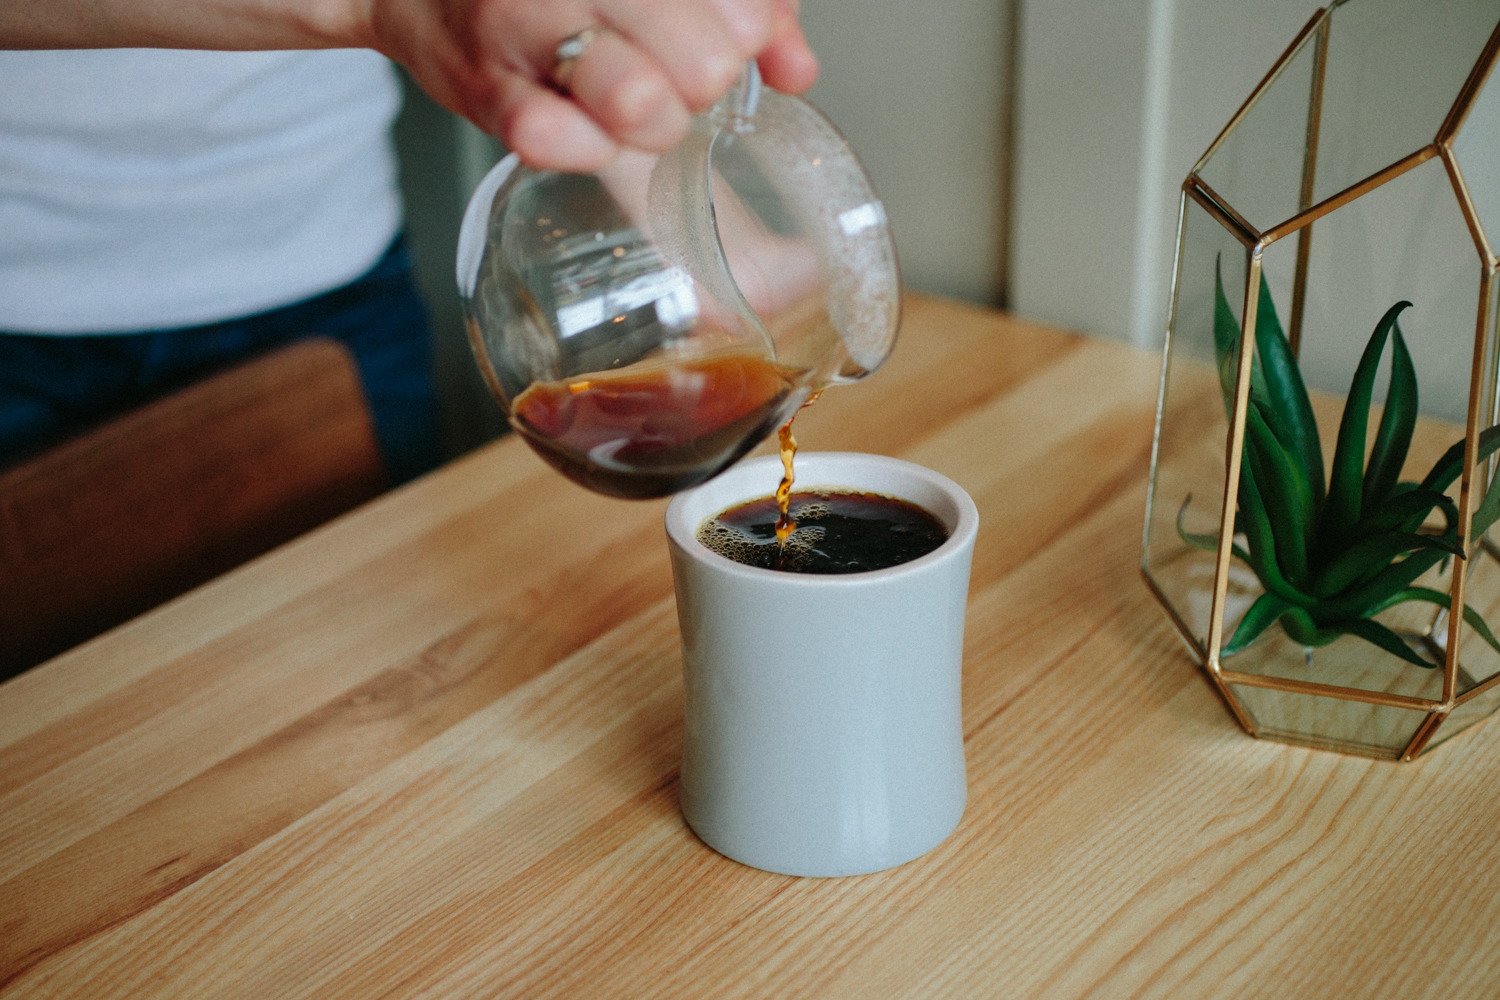 Image of a hand pouring a drip coffee in a mug